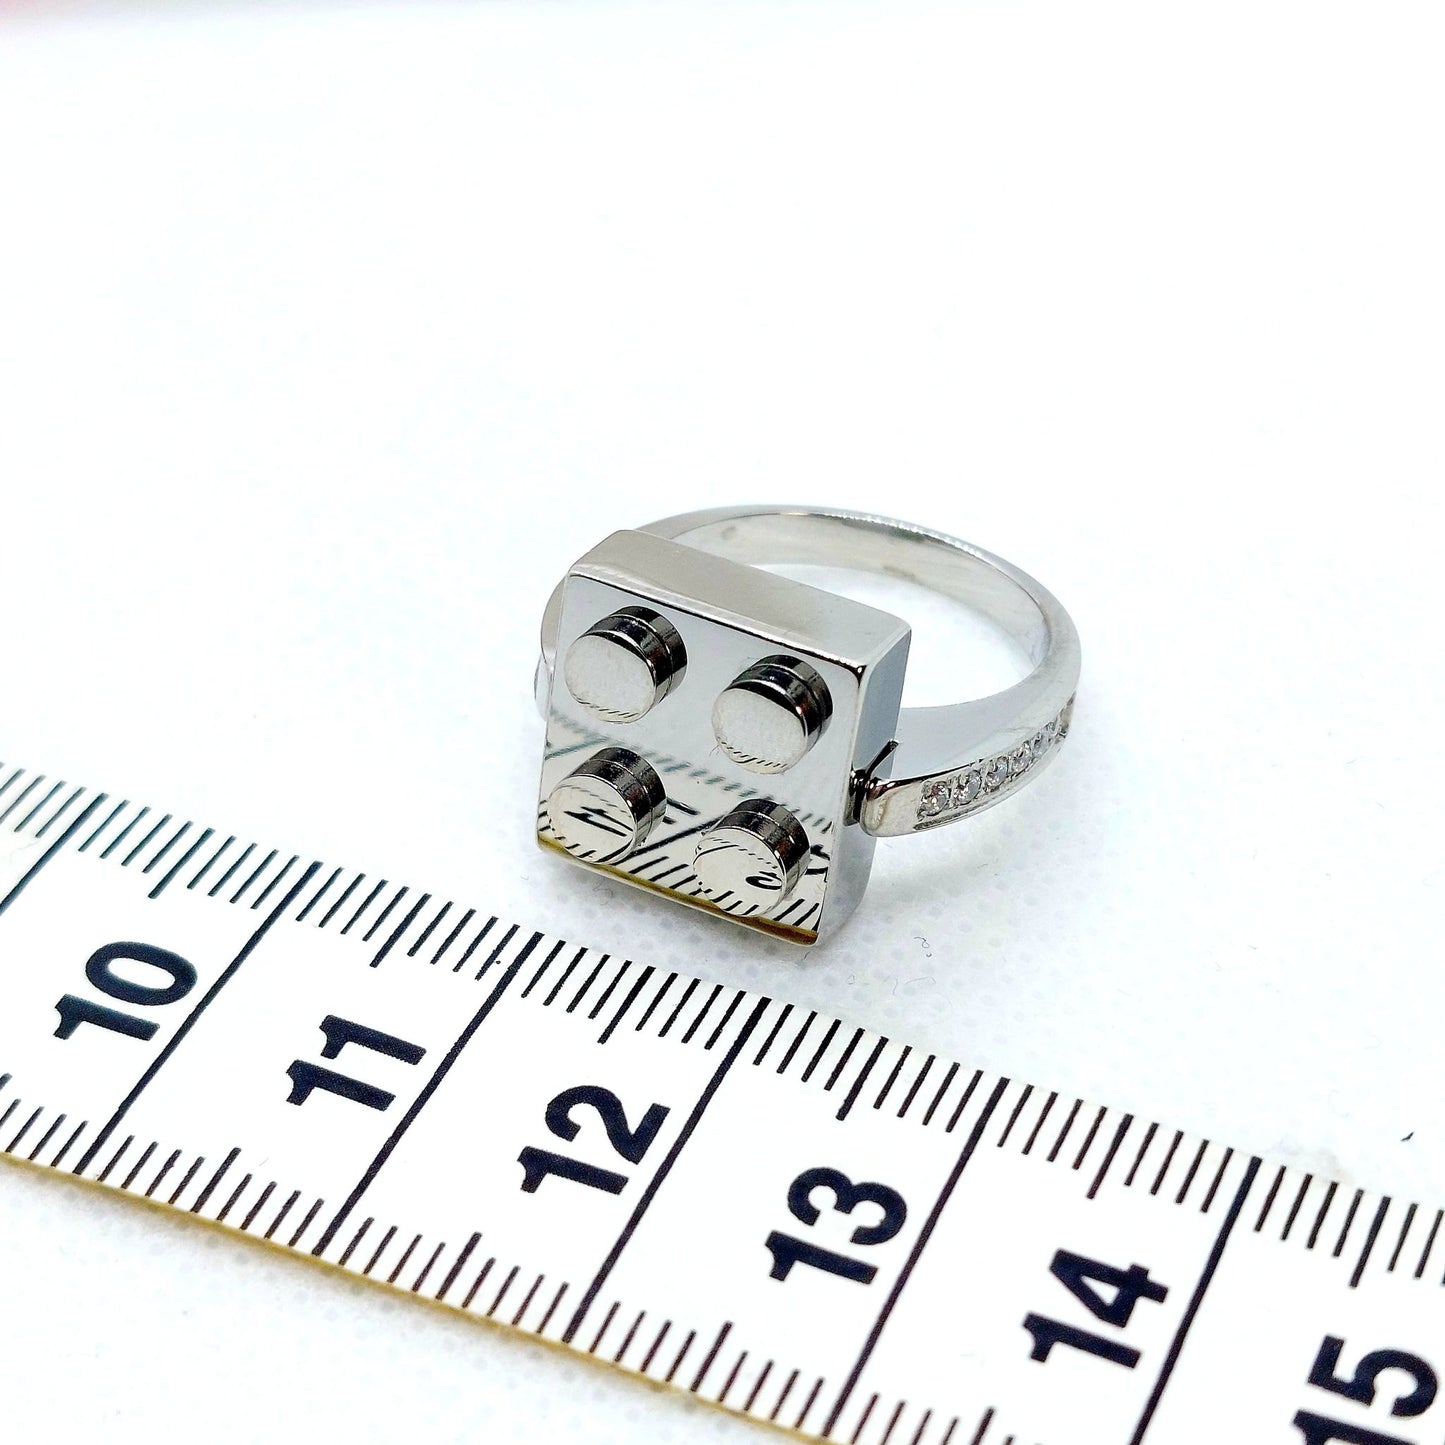 Lego Ring - Stainless Steel